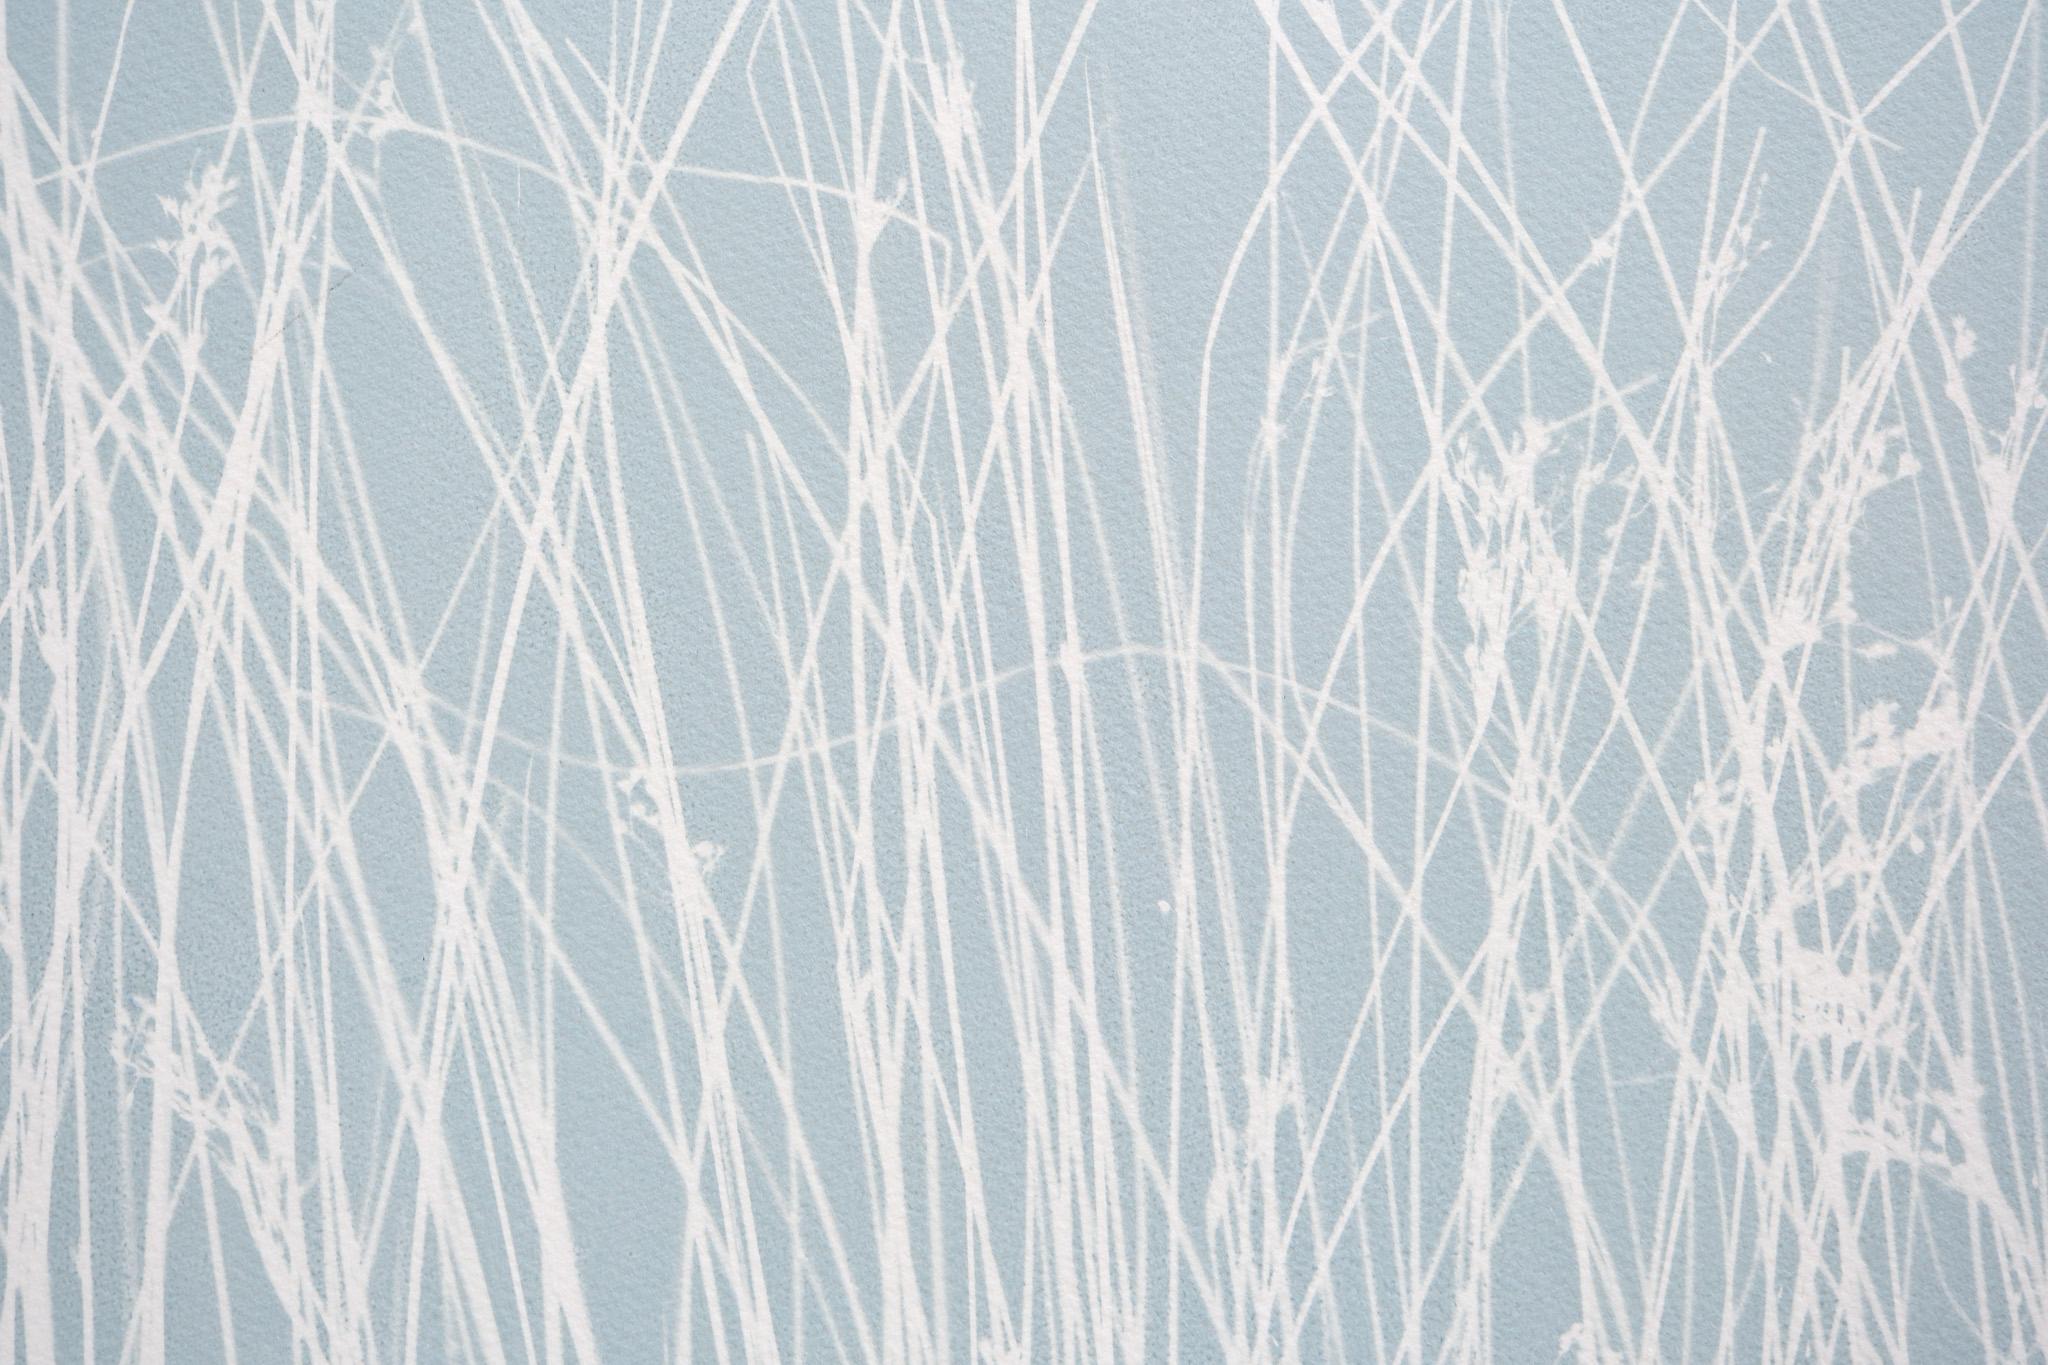 Unframed. 

Although this looks like a screen print or woodcut, it is actually a form of 19th-century lensless photography. The normal color of a cyanotype (blueprint) is dark blue and white. However, this greenish gray cyanotype was made by